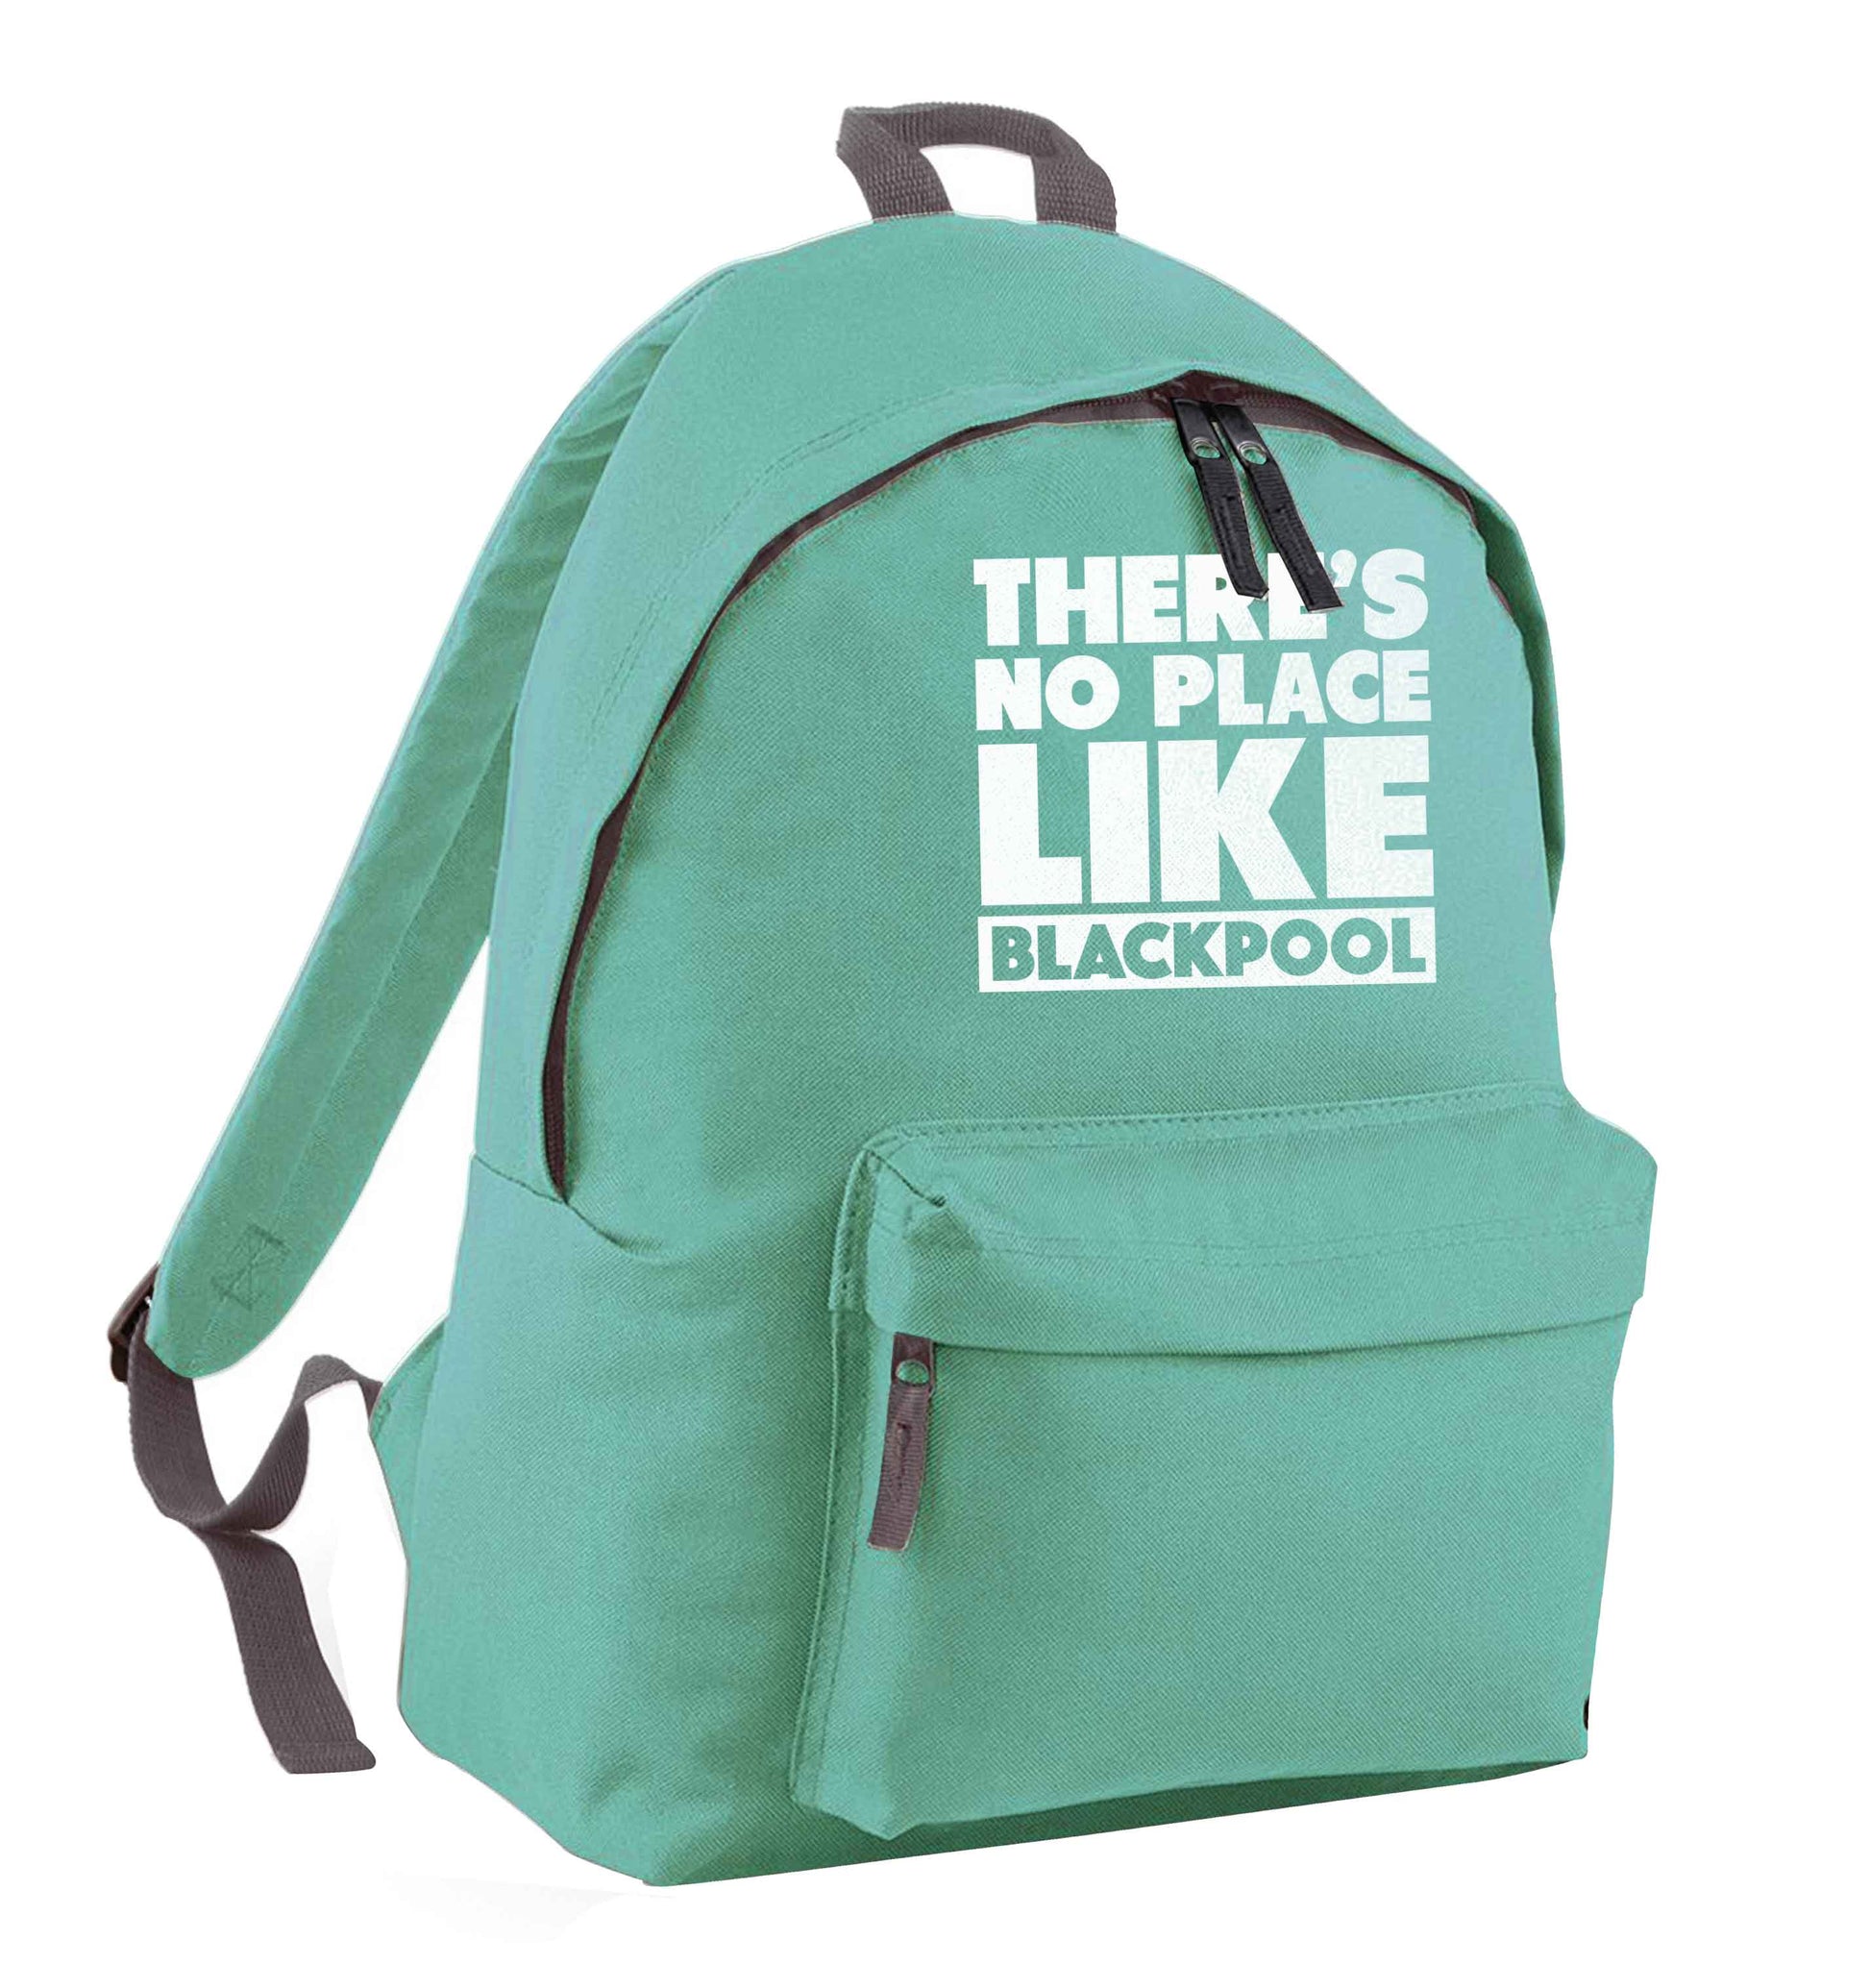 There's no place like Blackpool mint adults backpack